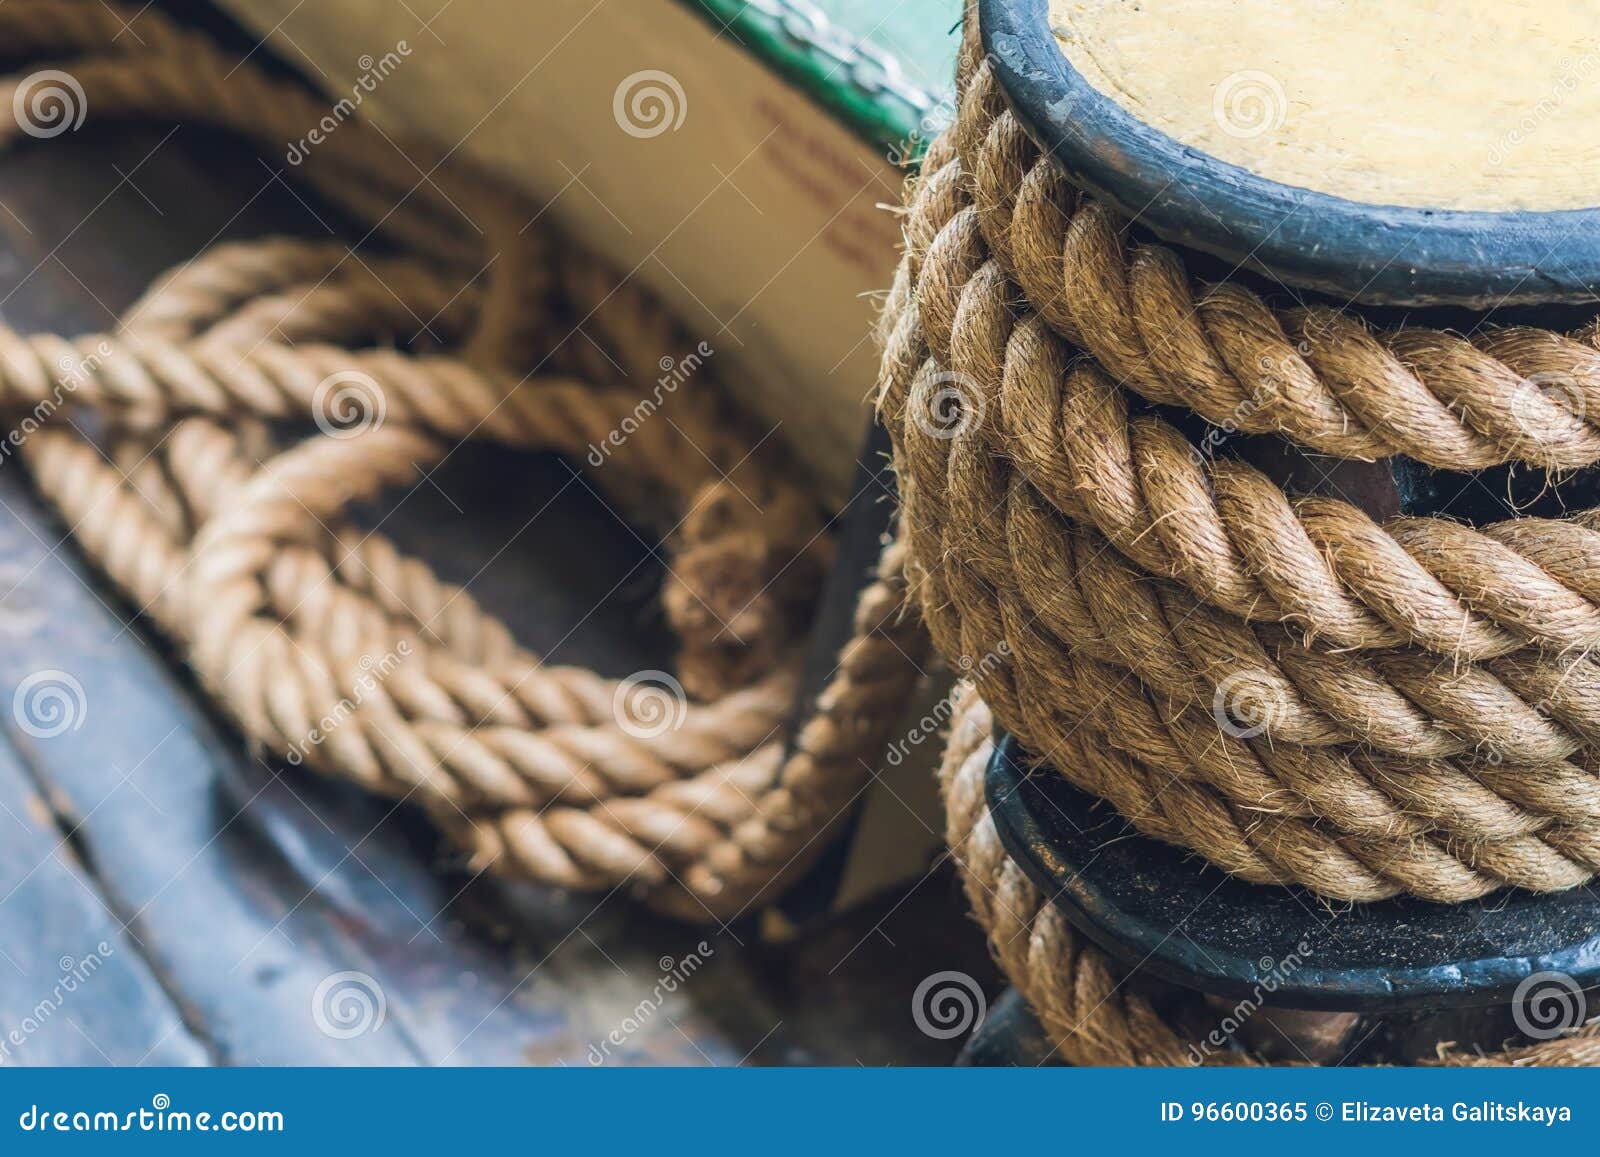 A Thick Rope on a Ship, a Ferry for Tethering Stock Image - Image